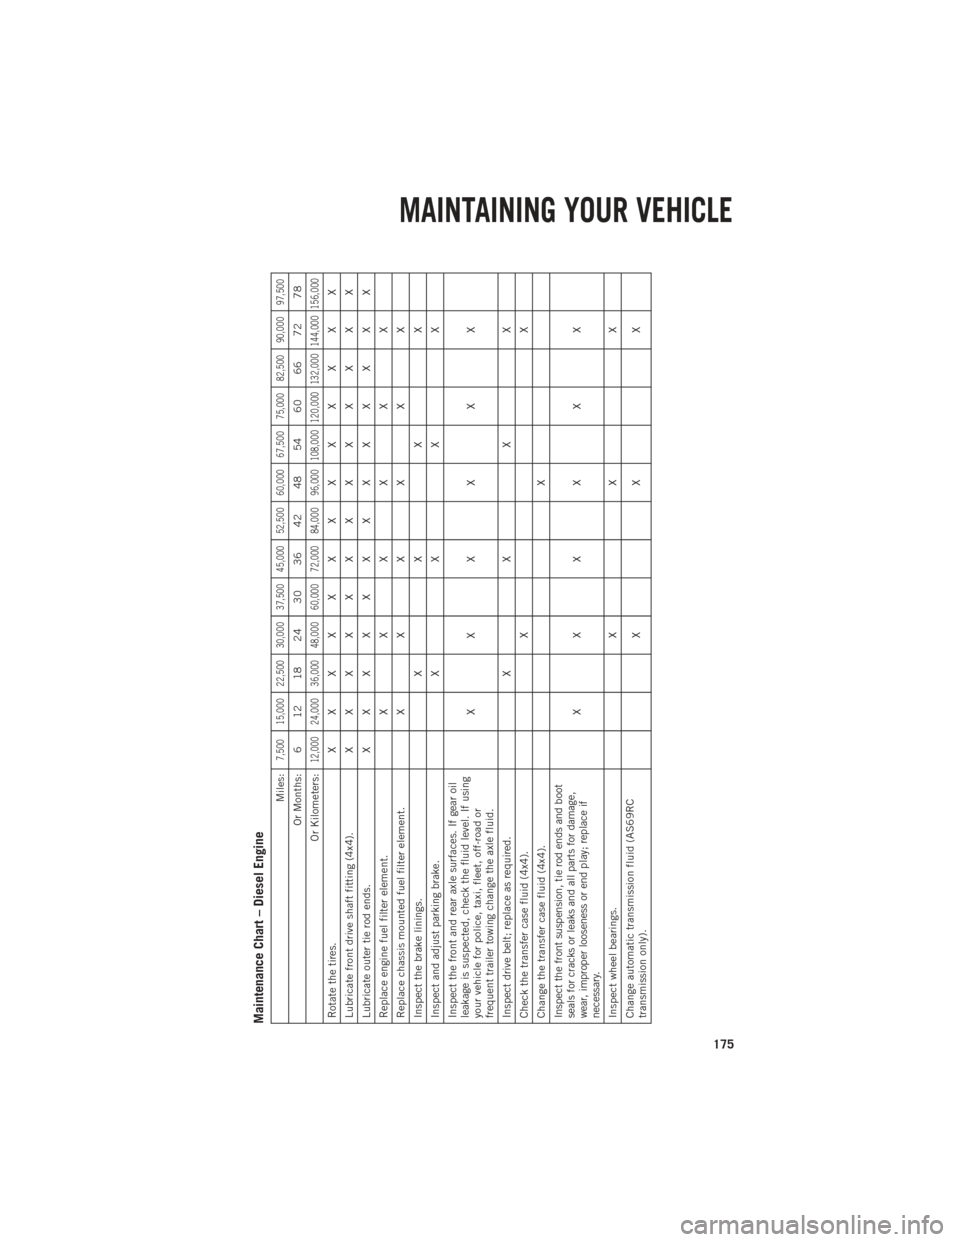 Ram 1500 2013  Get to Know Guide  Maintenance Chart – Diesel Engine
Miles:
7,500 15,000 22,500 30,000 37,500 45,000 52,500 60,000 67,500 75,000 82,500 90,000 97,500
Or Months: 6 12 18 24 30 36 42 48 54 60 66 72 78
Or Kilometers:
12,